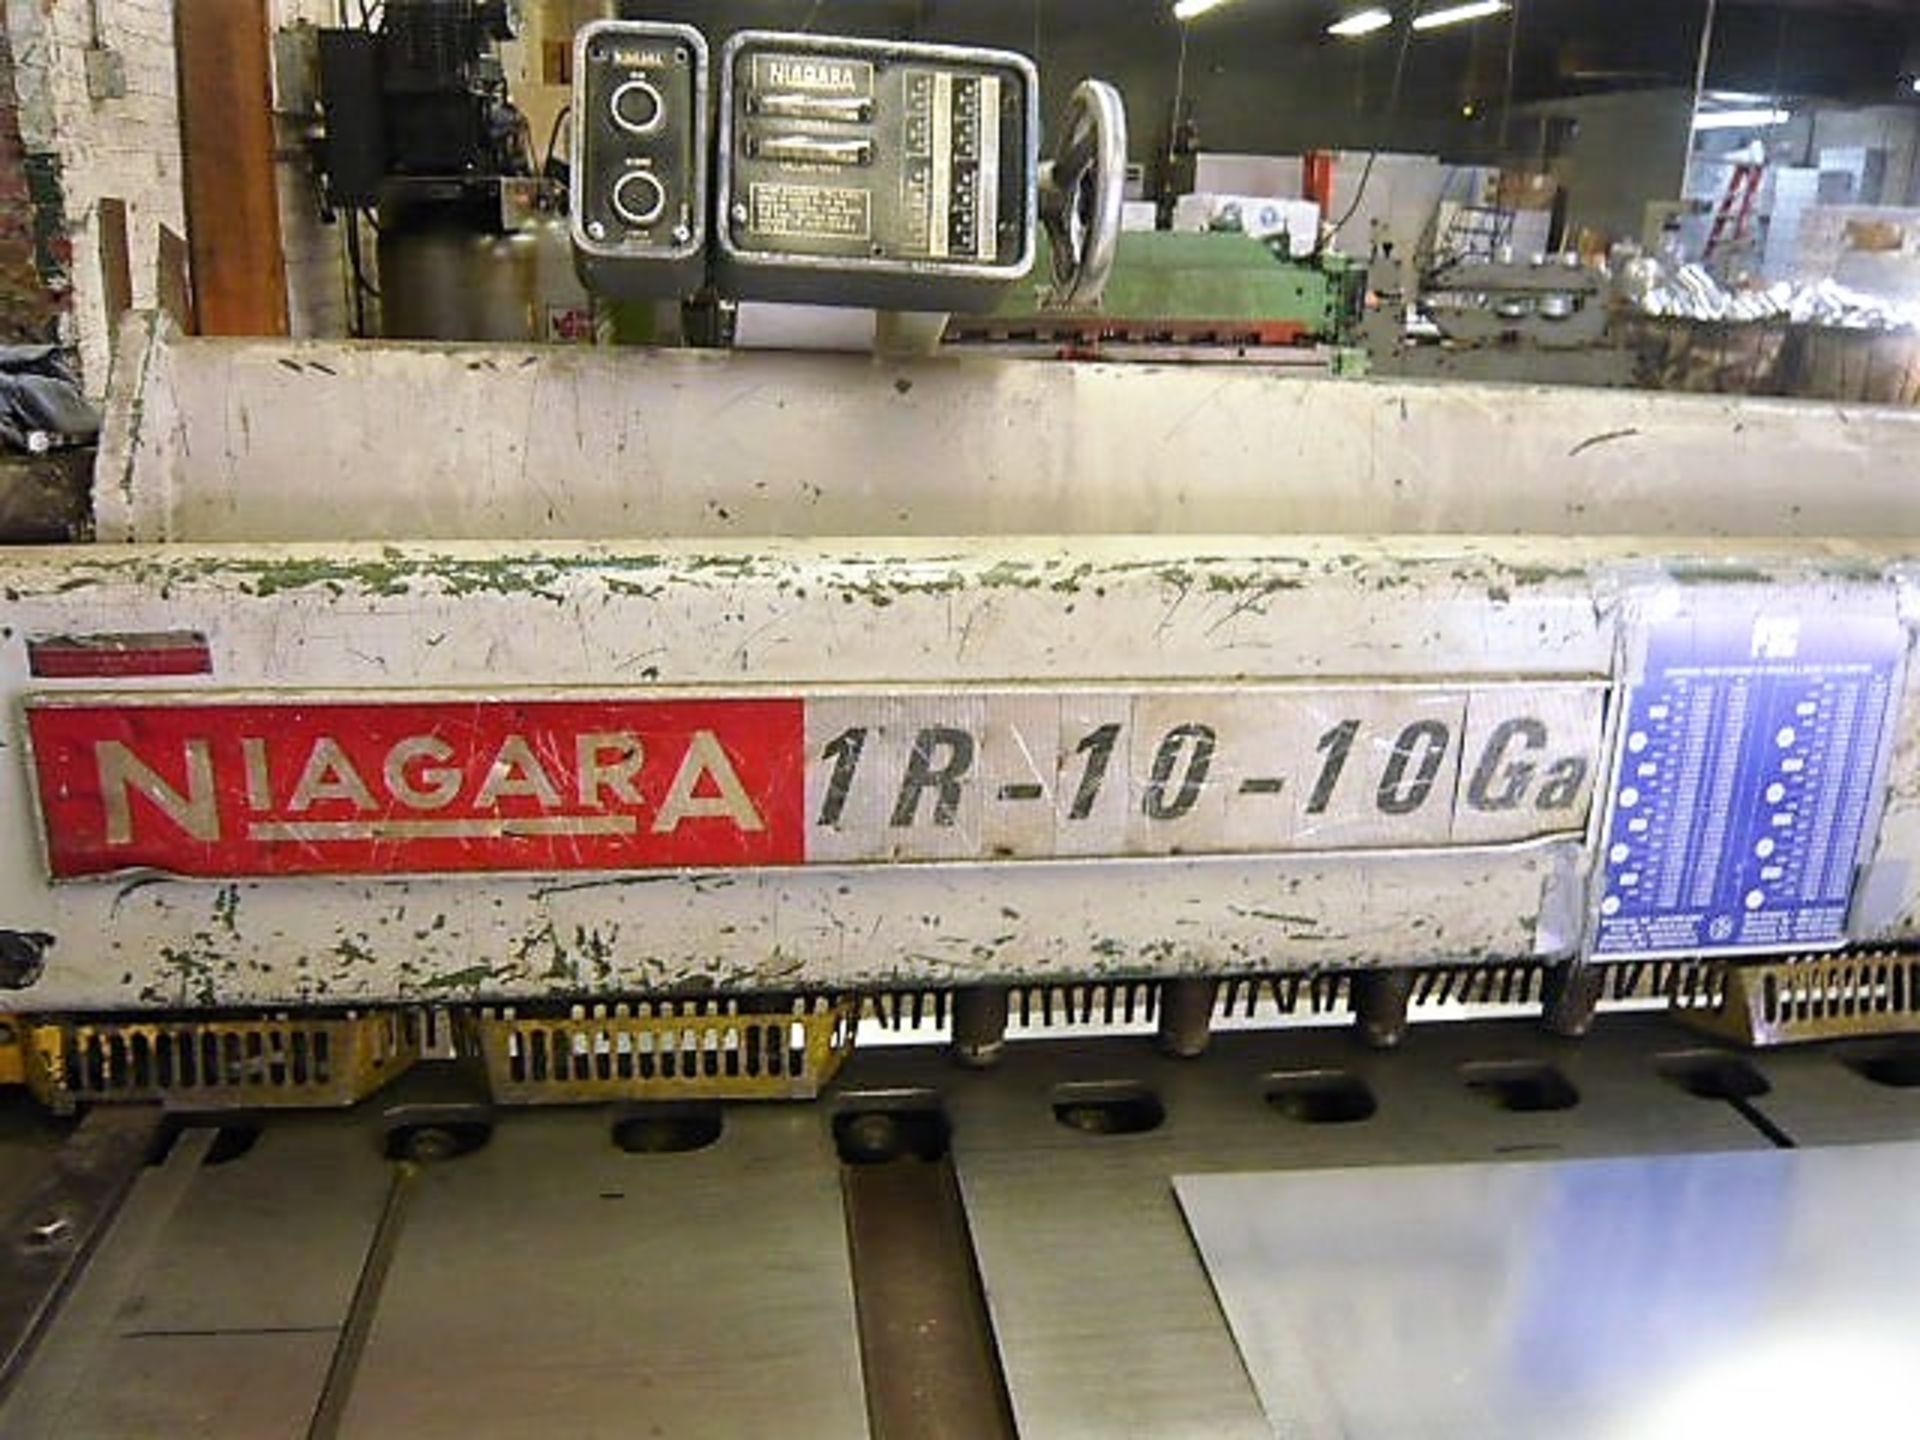 10ga X 10' NIAGARA MDL. 1R-10-10 MECHANICAL POWER SHEAR, WITH SQUARING ARM, FRONT OPERATED POWER - Image 4 of 8